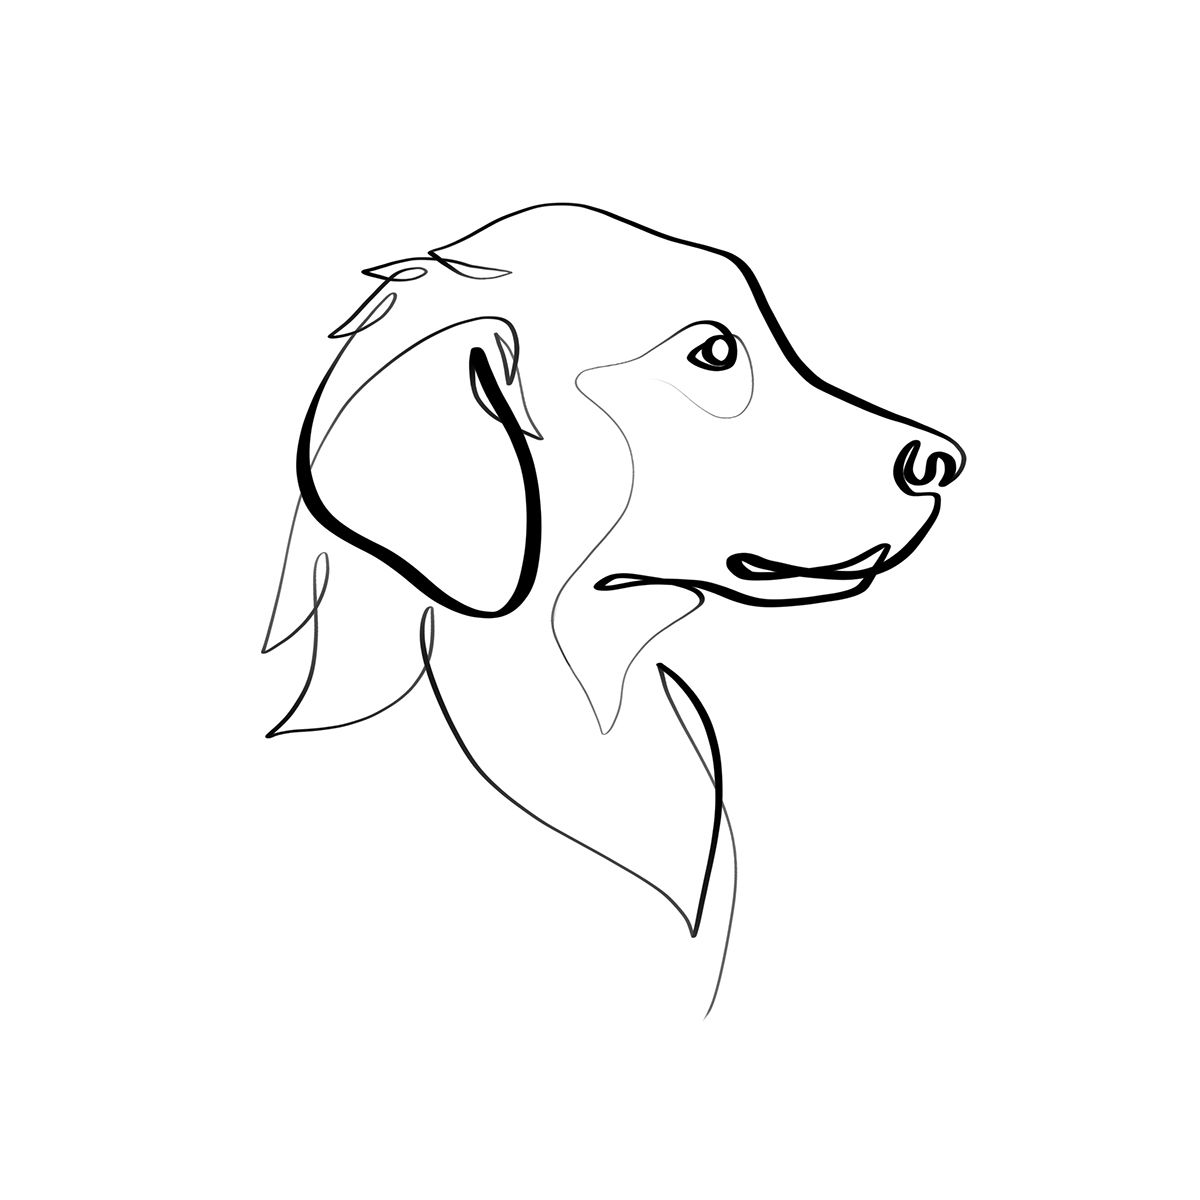 Dogs Line Drawing Hand drawn Sketch